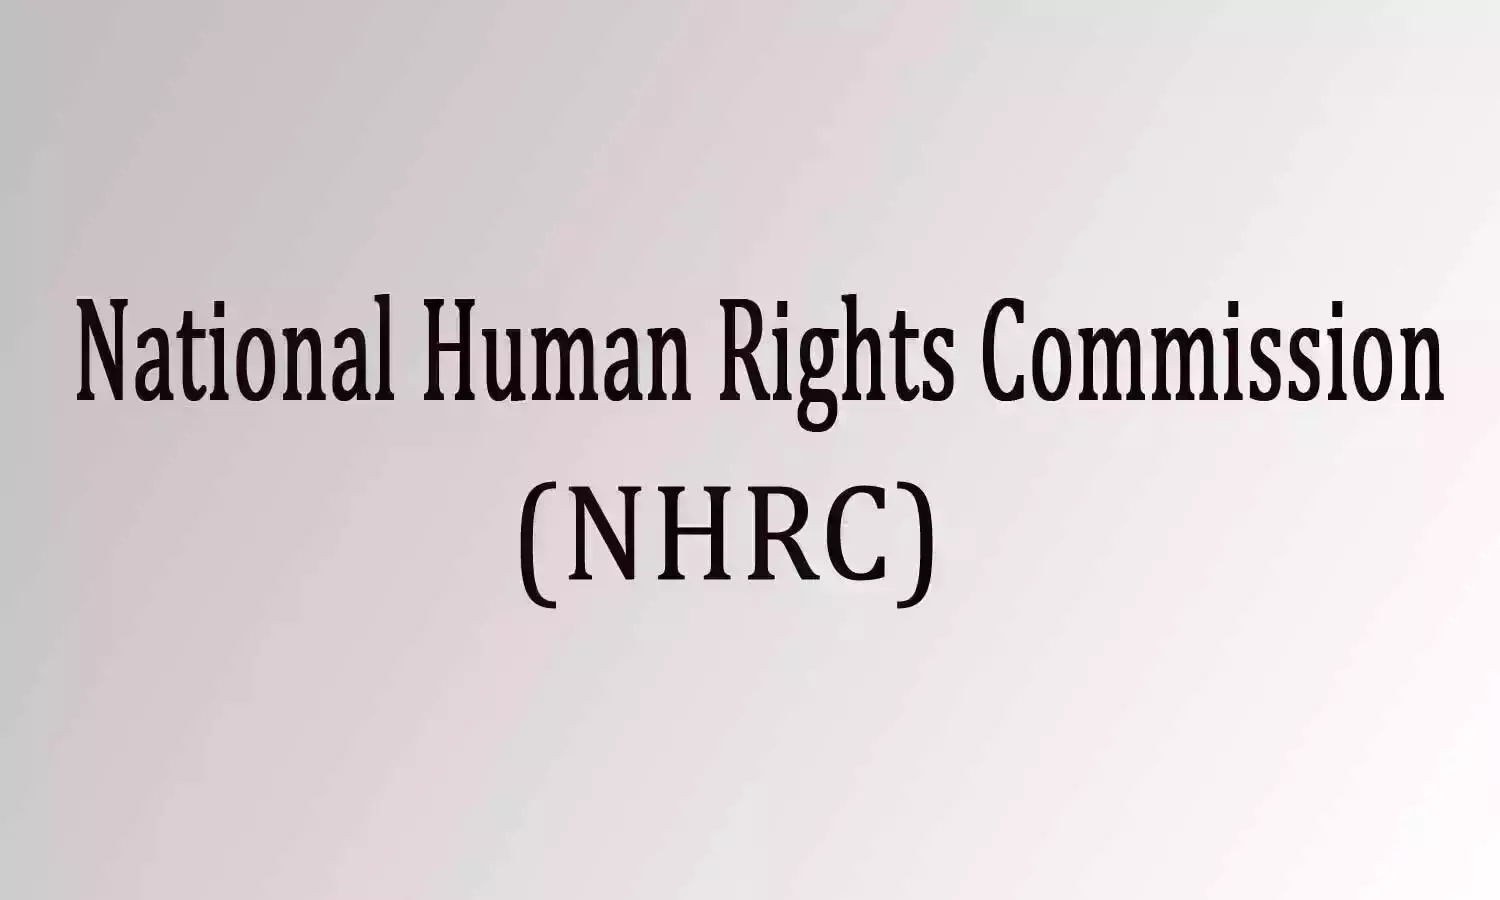 Black fungus deaths in India: NHRC directs Health Ministry to act immediately, submit report